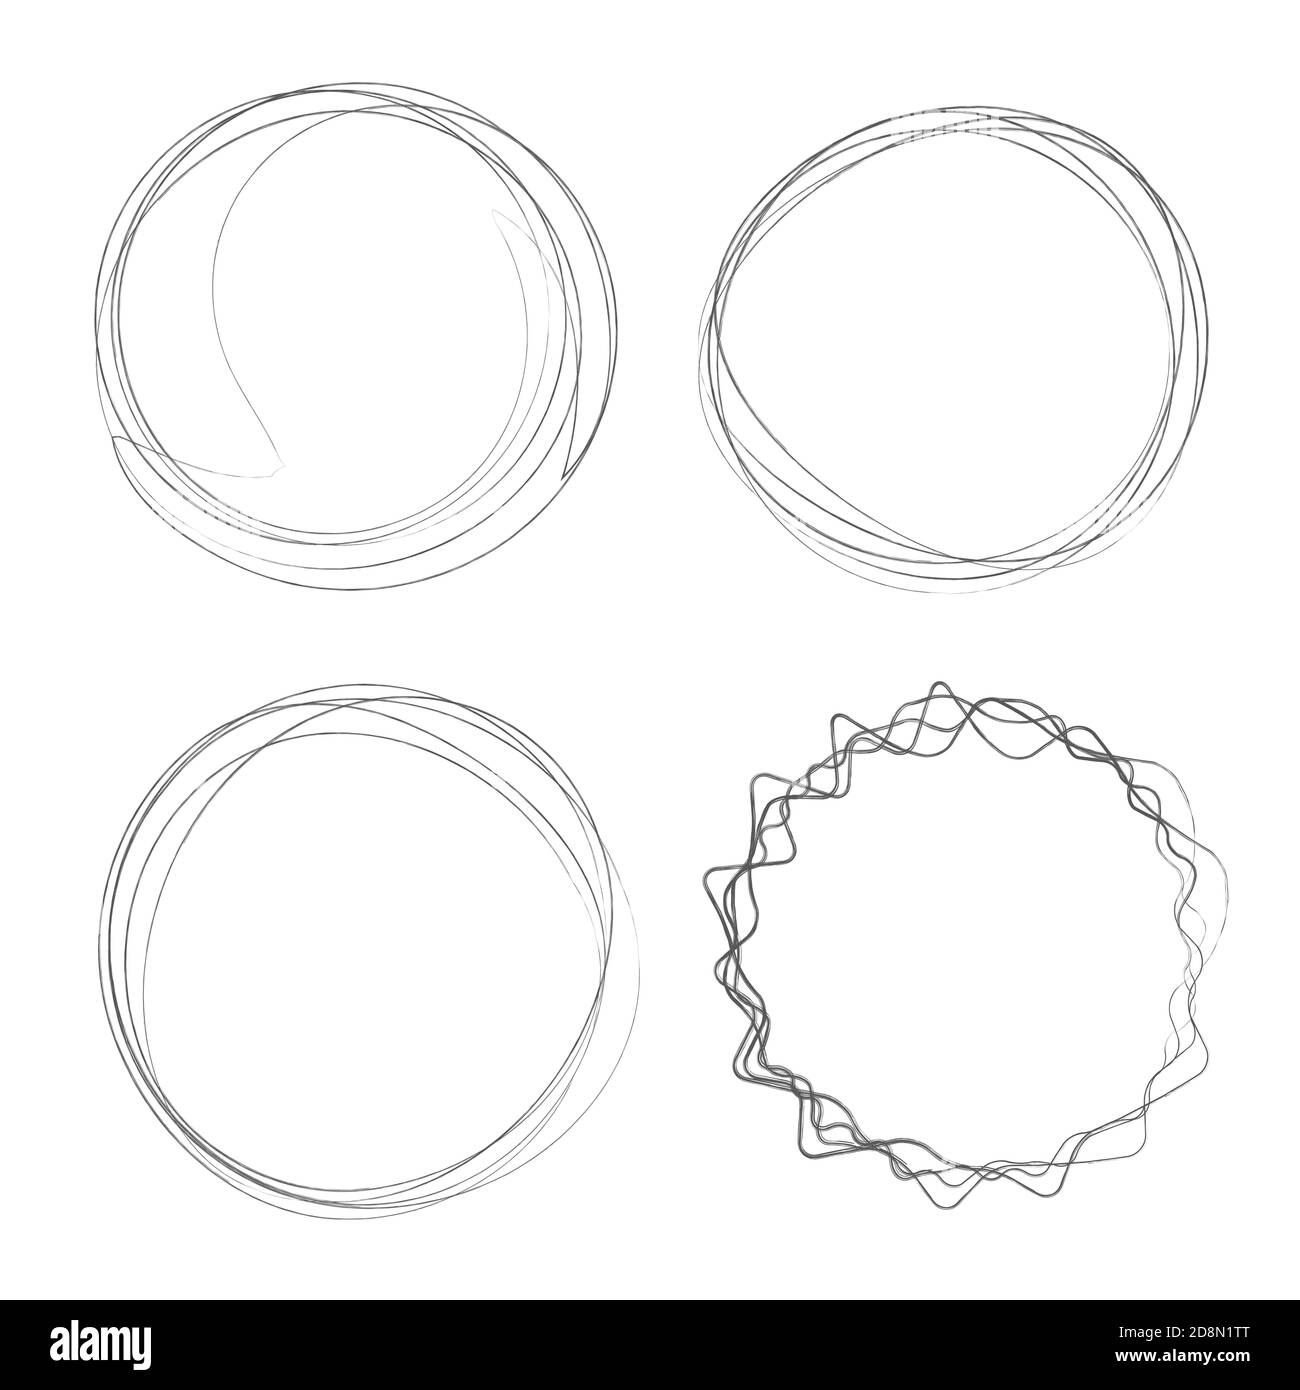 Hand drawn circles, circular scribble black doodles isolated on white. illustration. Stock Photo